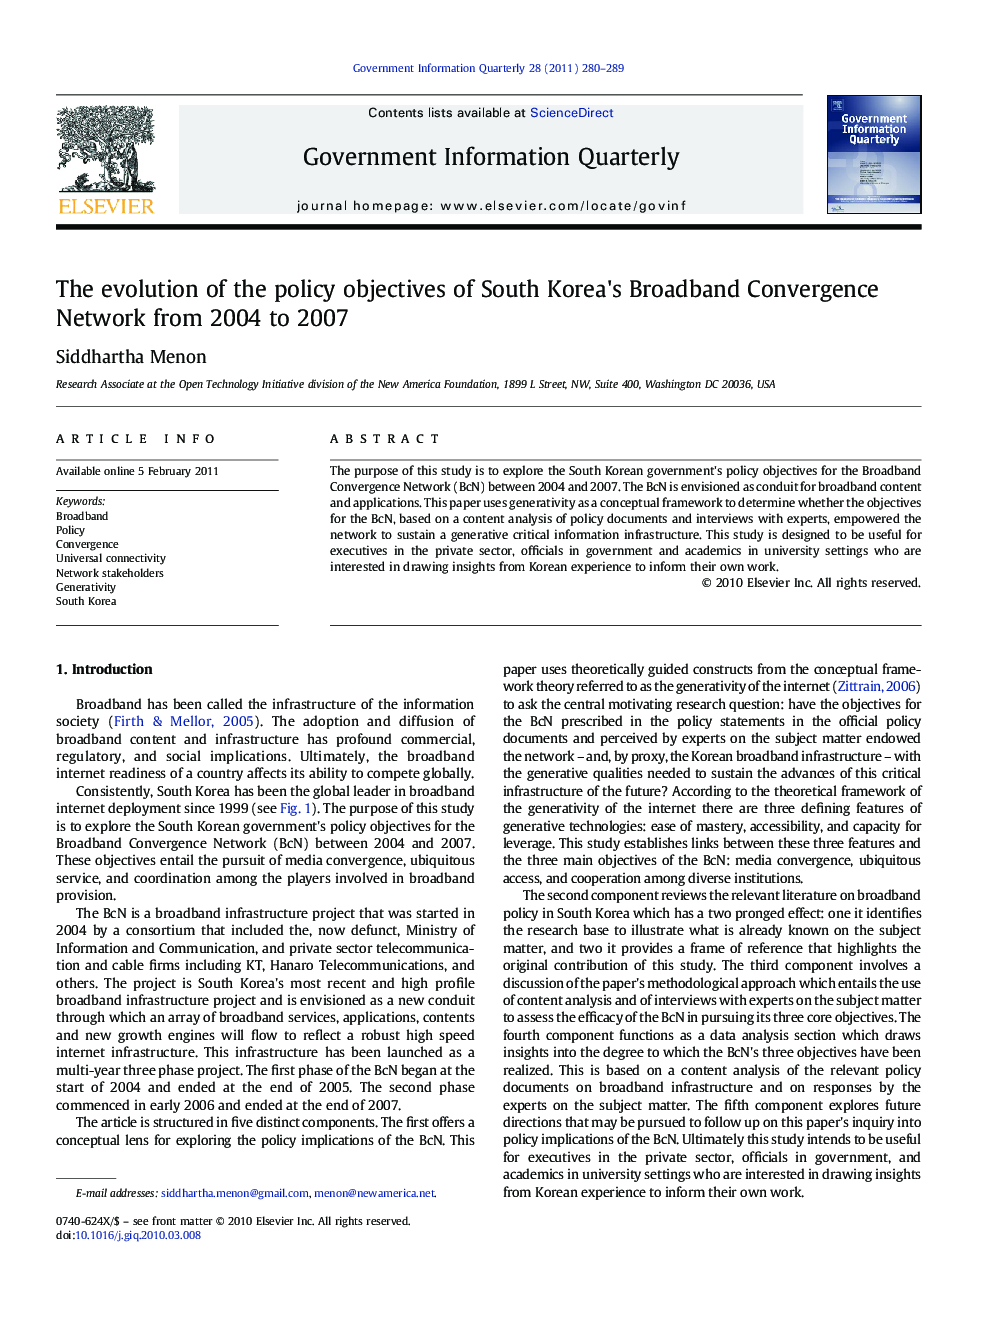 The evolution of the policy objectives of South Korea's Broadband Convergence Network from 2004 to 2007